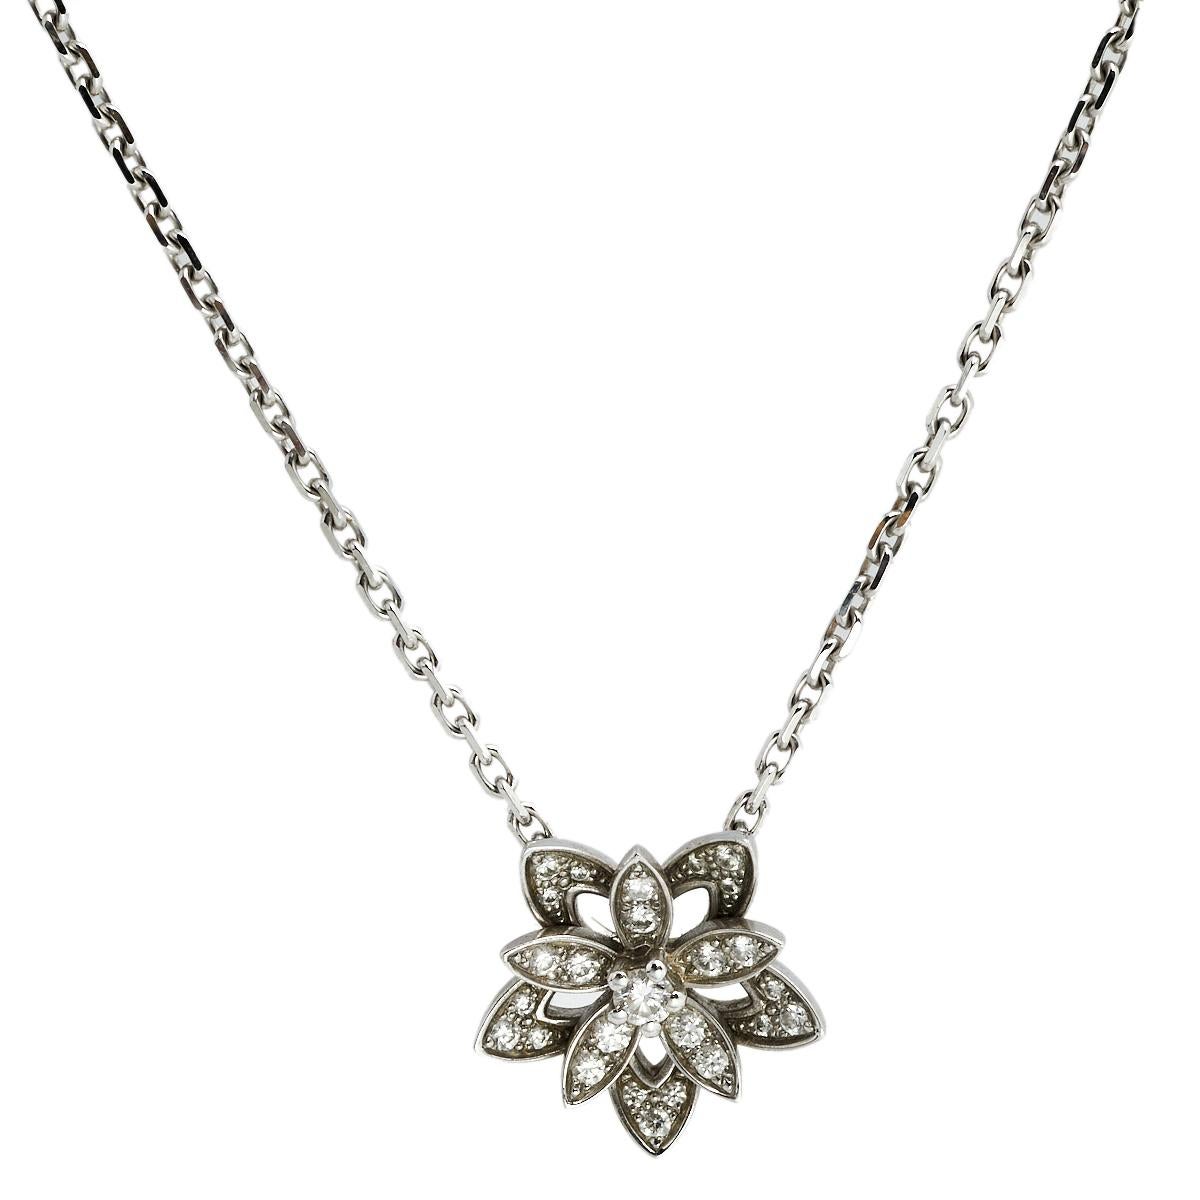 The beauty of a lotus flower is brought into jewelry by Van Cleef & Arpels with this stunning necklace. It is made of 18k white gold and the delicate chain holds a grand flower pendant that's set with shimmering diamonds. The simple elements and the